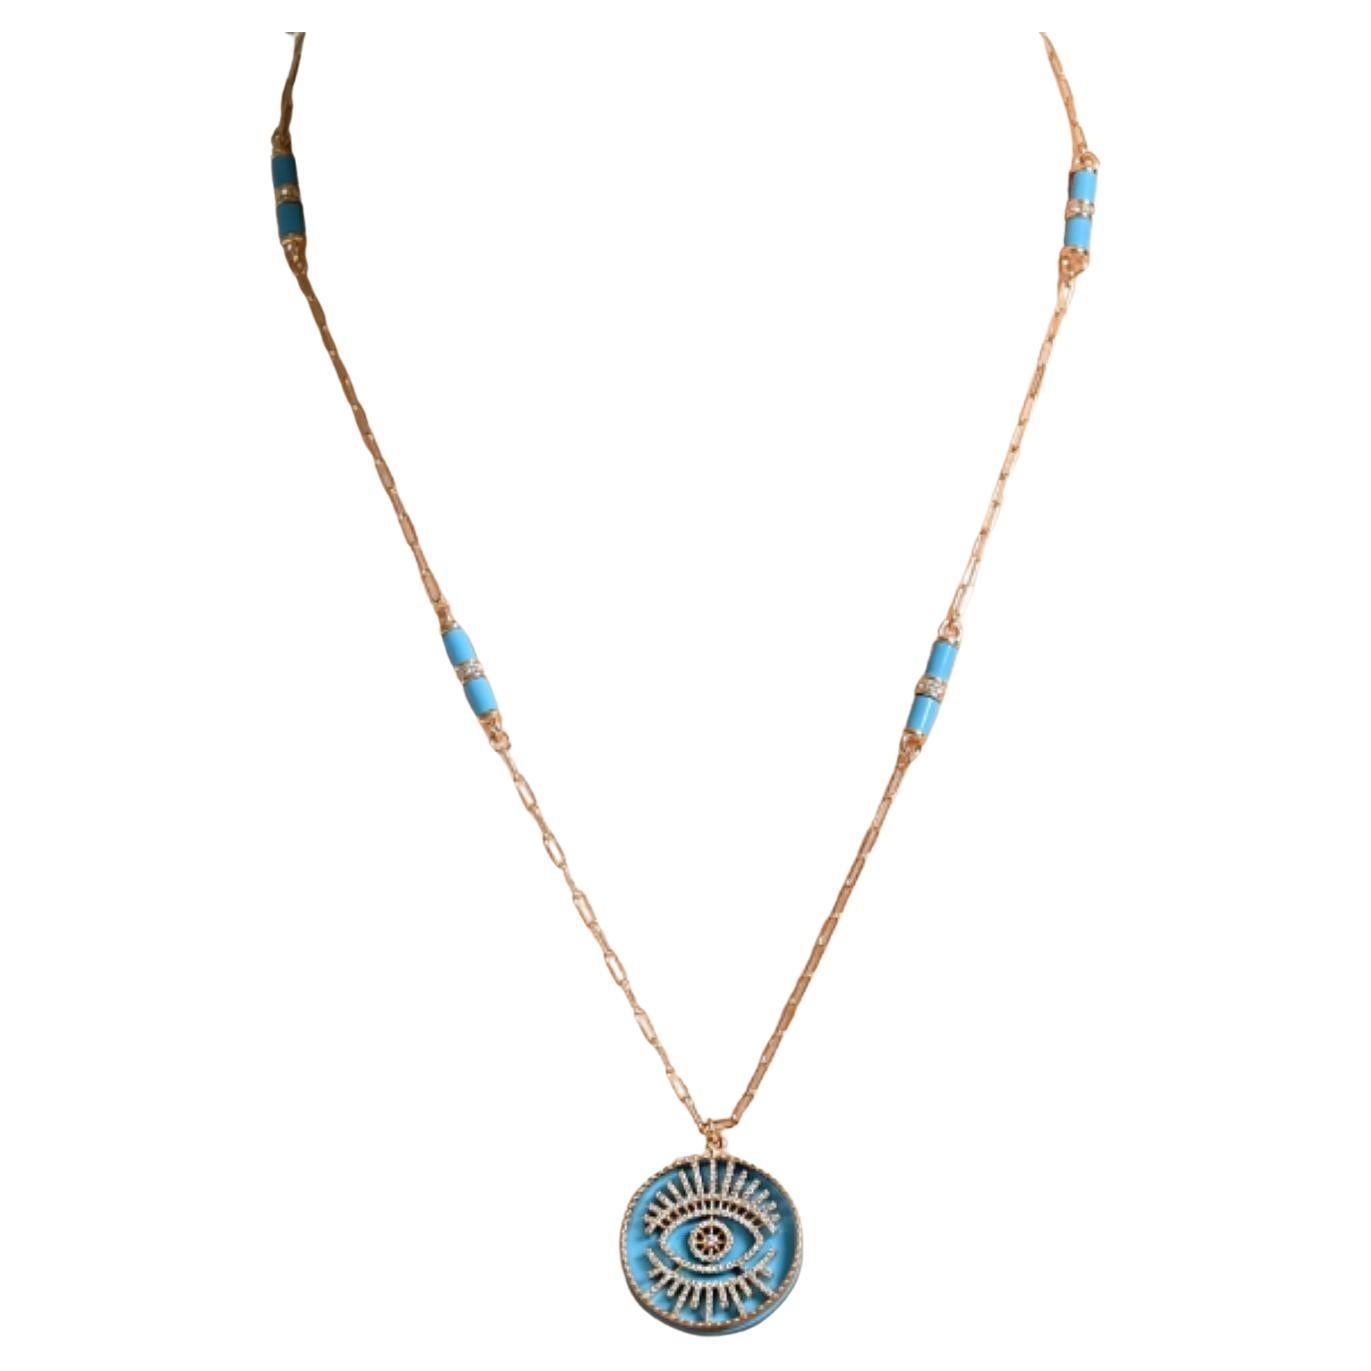 The eye symbolizes spirit and wisdom, reflecting life's beauty and radiance back into the world. Wearing the Bee Goddess 'eye light' talisman opens the heart to spiritual wisdom and enlightenment, offering a fresh perspective and illuminating new